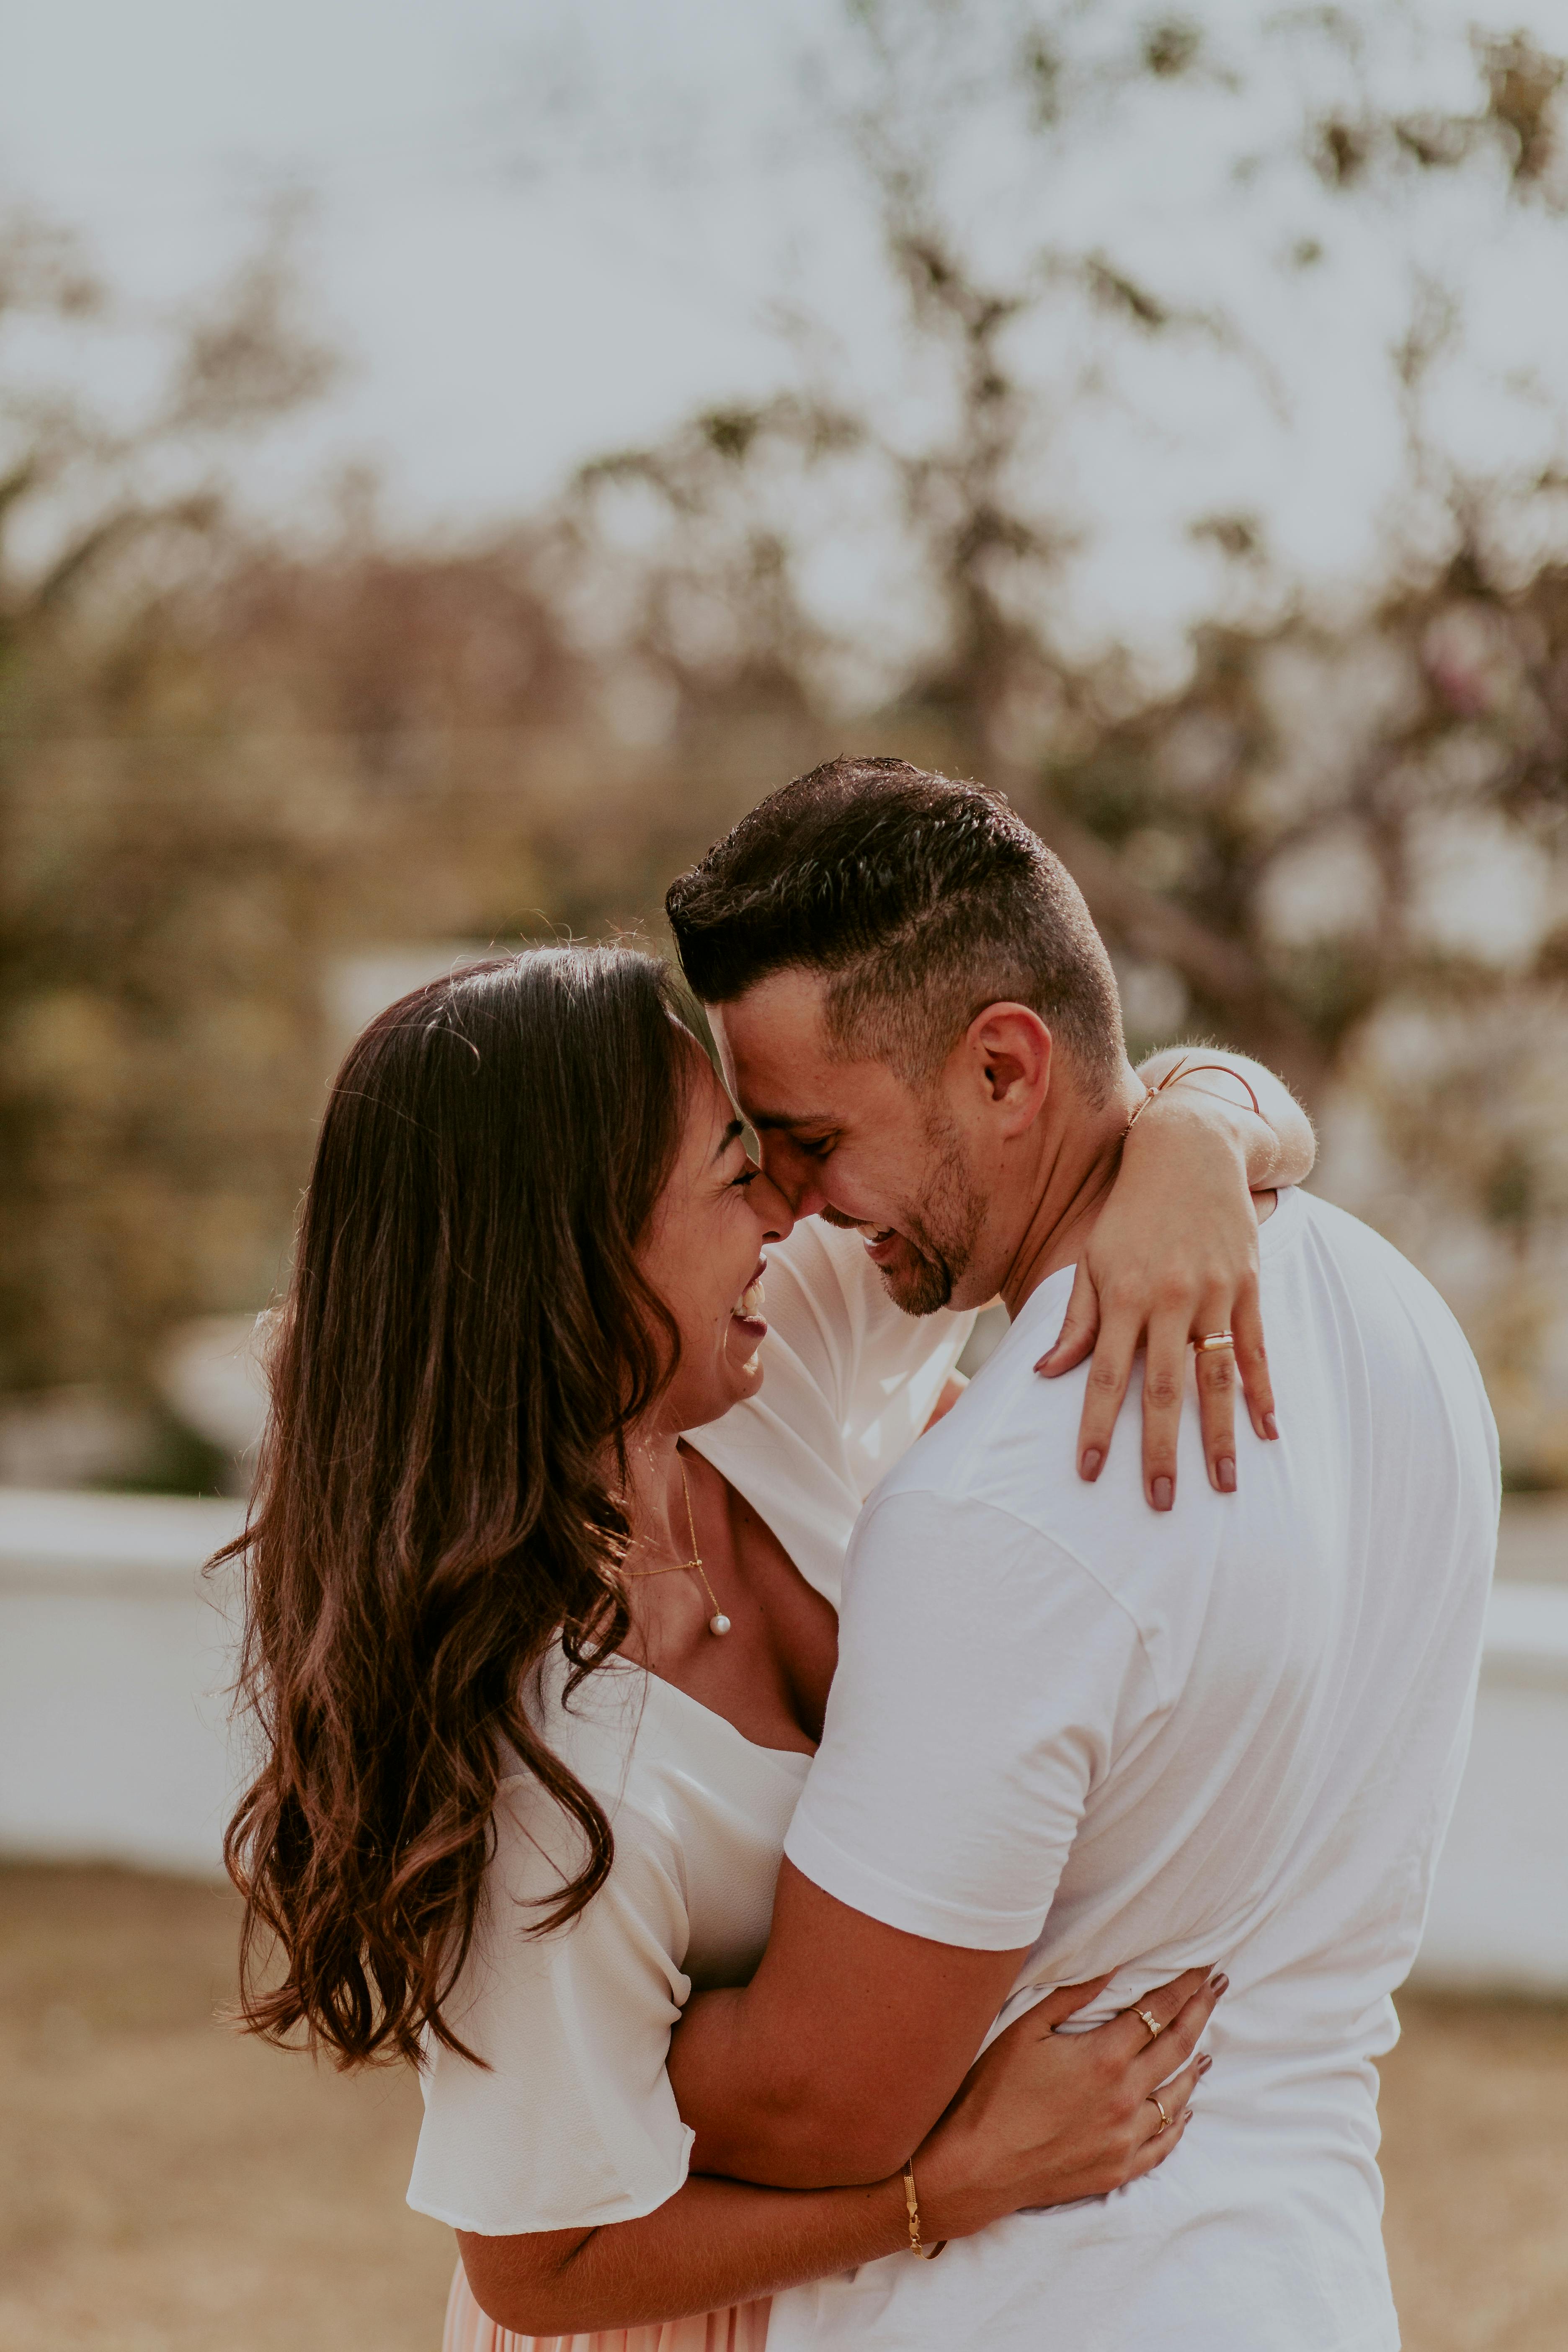 A happy couple embracing | Source: Pexels